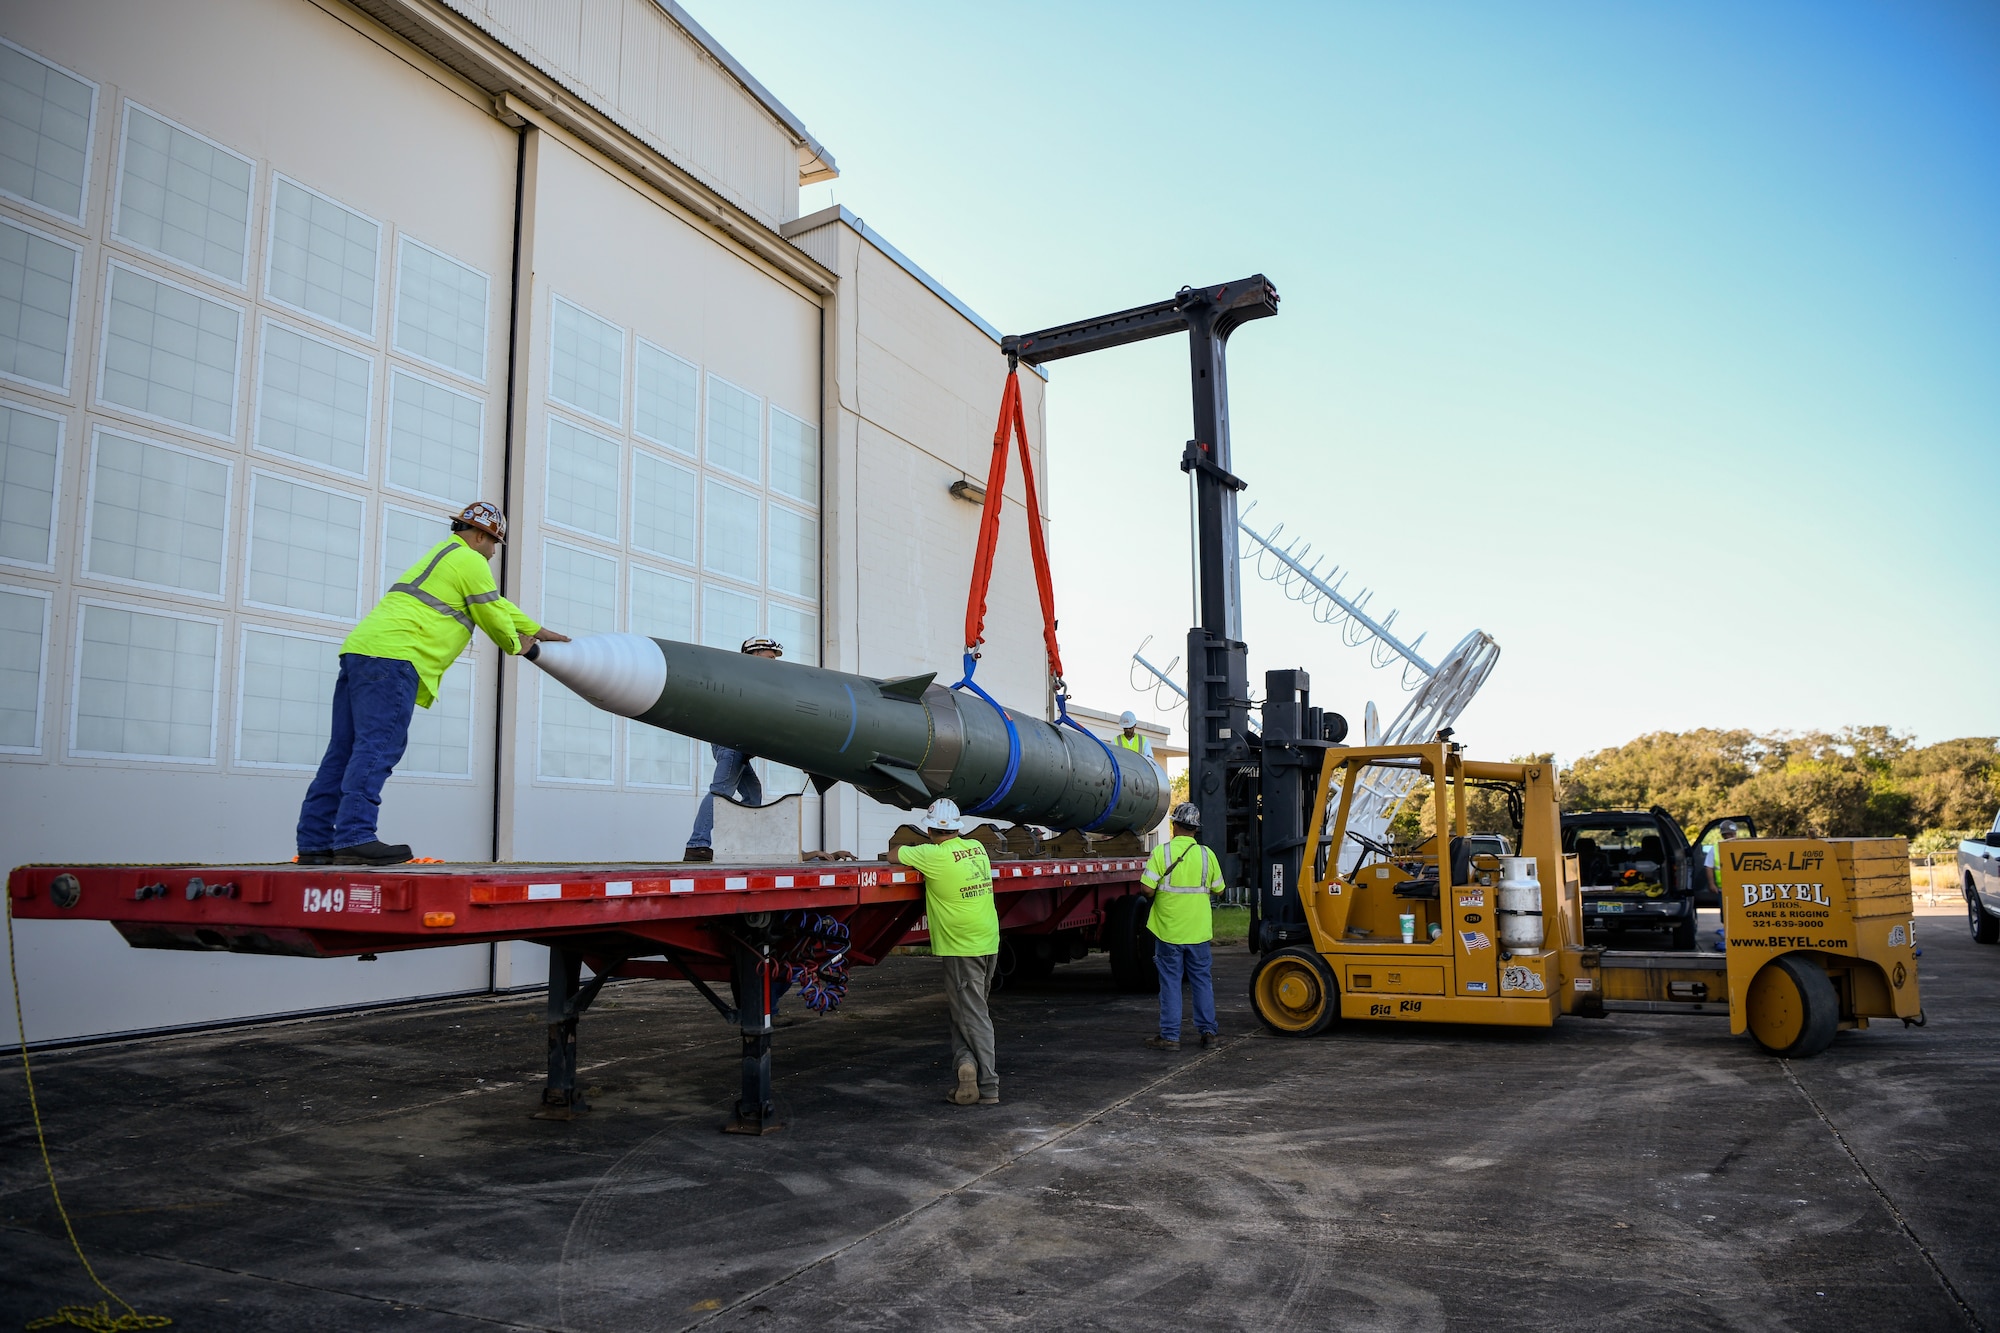 The Pershing II, a mobile intermediate-range ballistic missile, is prepared for transportation into Hanger C on Cape Canaveral Air Force Station, Florida, Oct. 29, 2020. Under the terms of the 1987 Intermediate-Range Nuclear Forces Treaty between the United States and the Soviet Union, all Pershing IIs and their support equipment were removed from the inventory and rendered inoperable. (U.S. Space Force Photo By Airman Thomas Sjoberg)